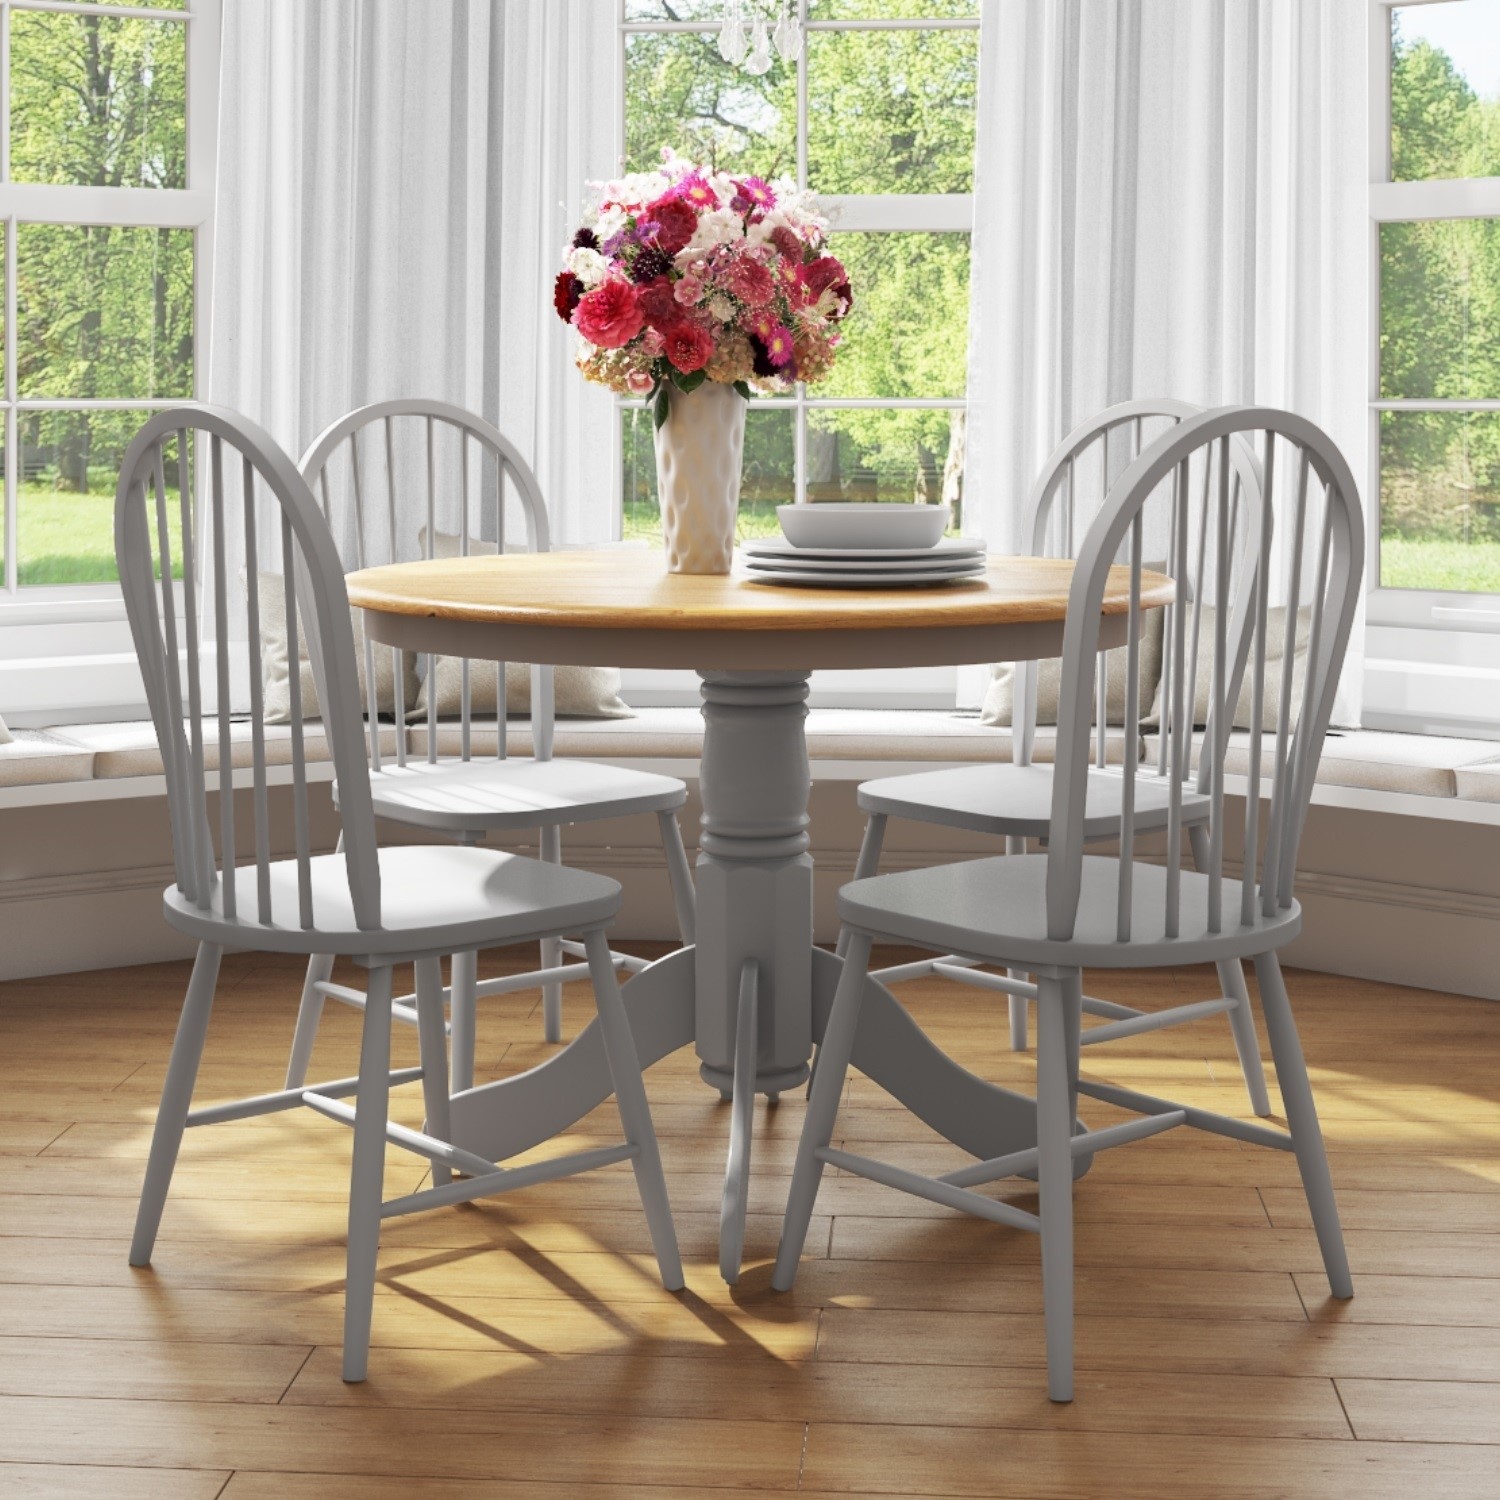 Round Dining Table With 4 Chairs In, Round Dining Table And Chairs For 4 Ireland